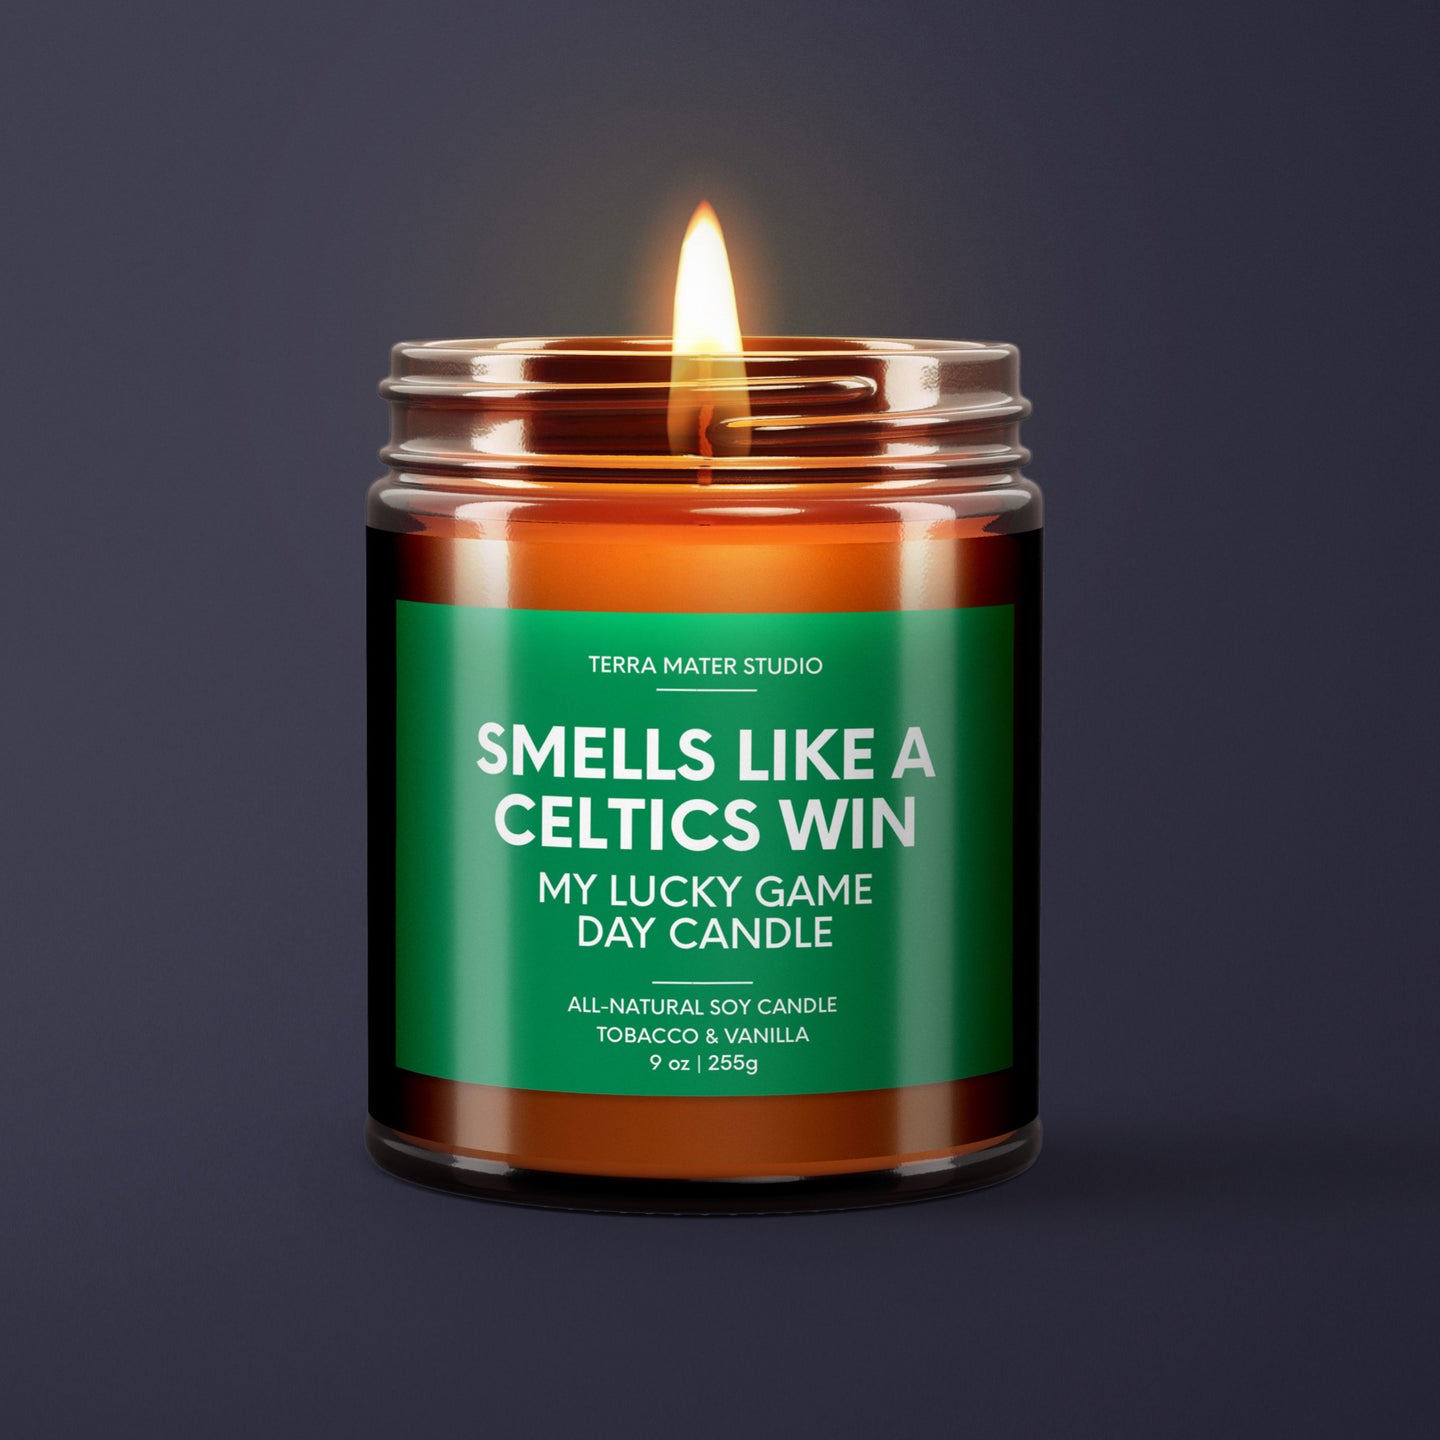 Smells Like A Celtics Win | Boston Lucky Game Day Candle | Soy Wax Candle